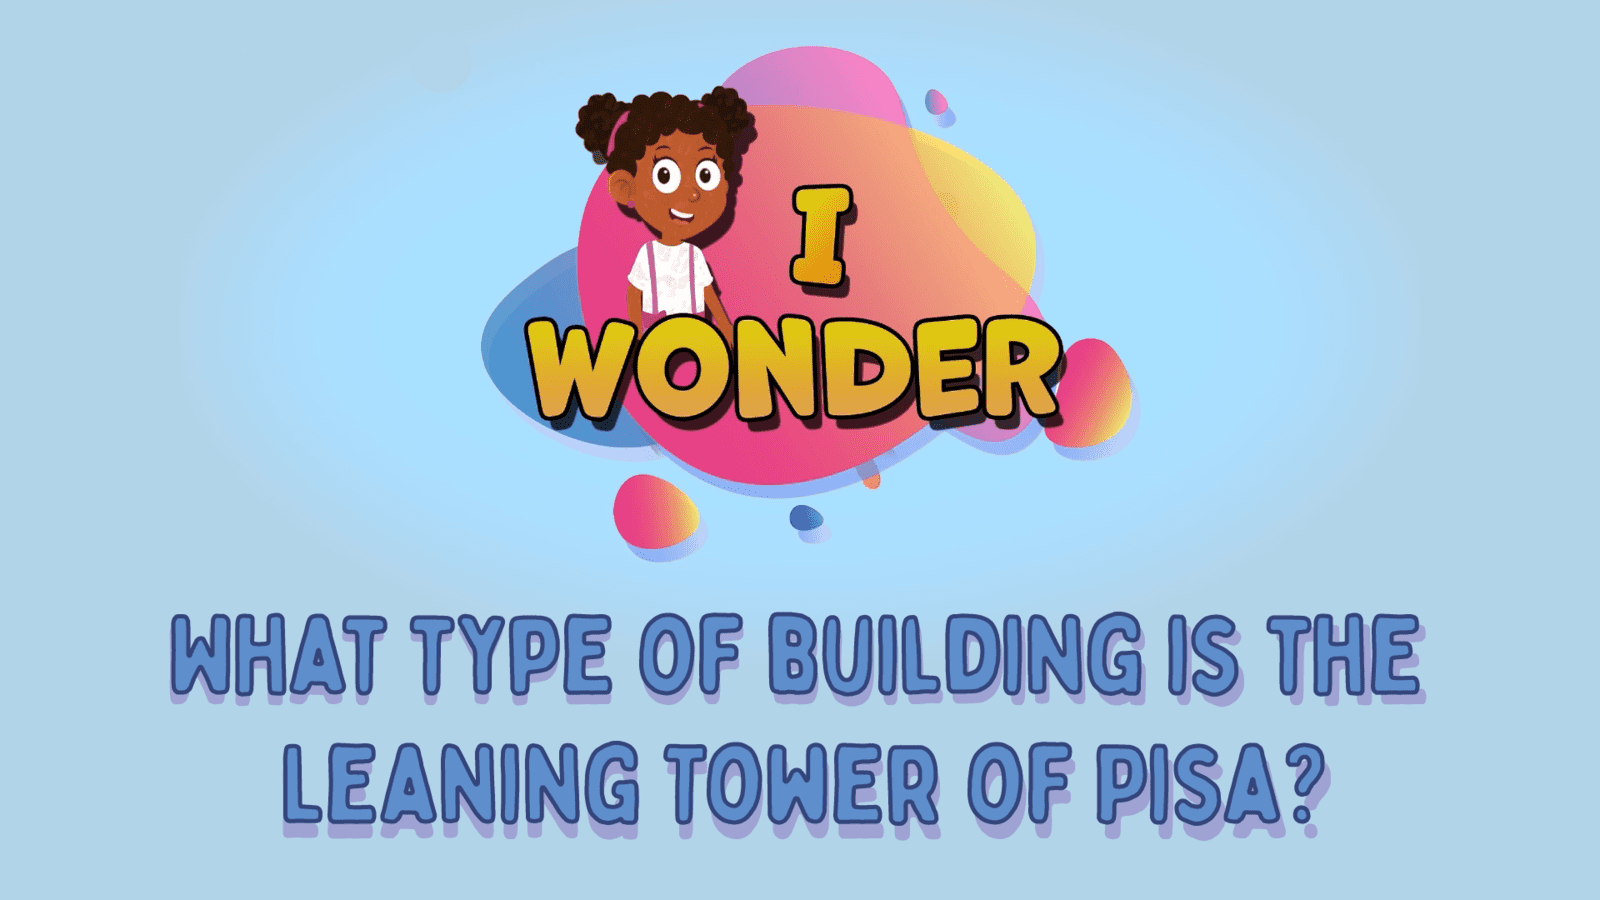 What Type Of Building Is The Leaning Tower Of Pisa?